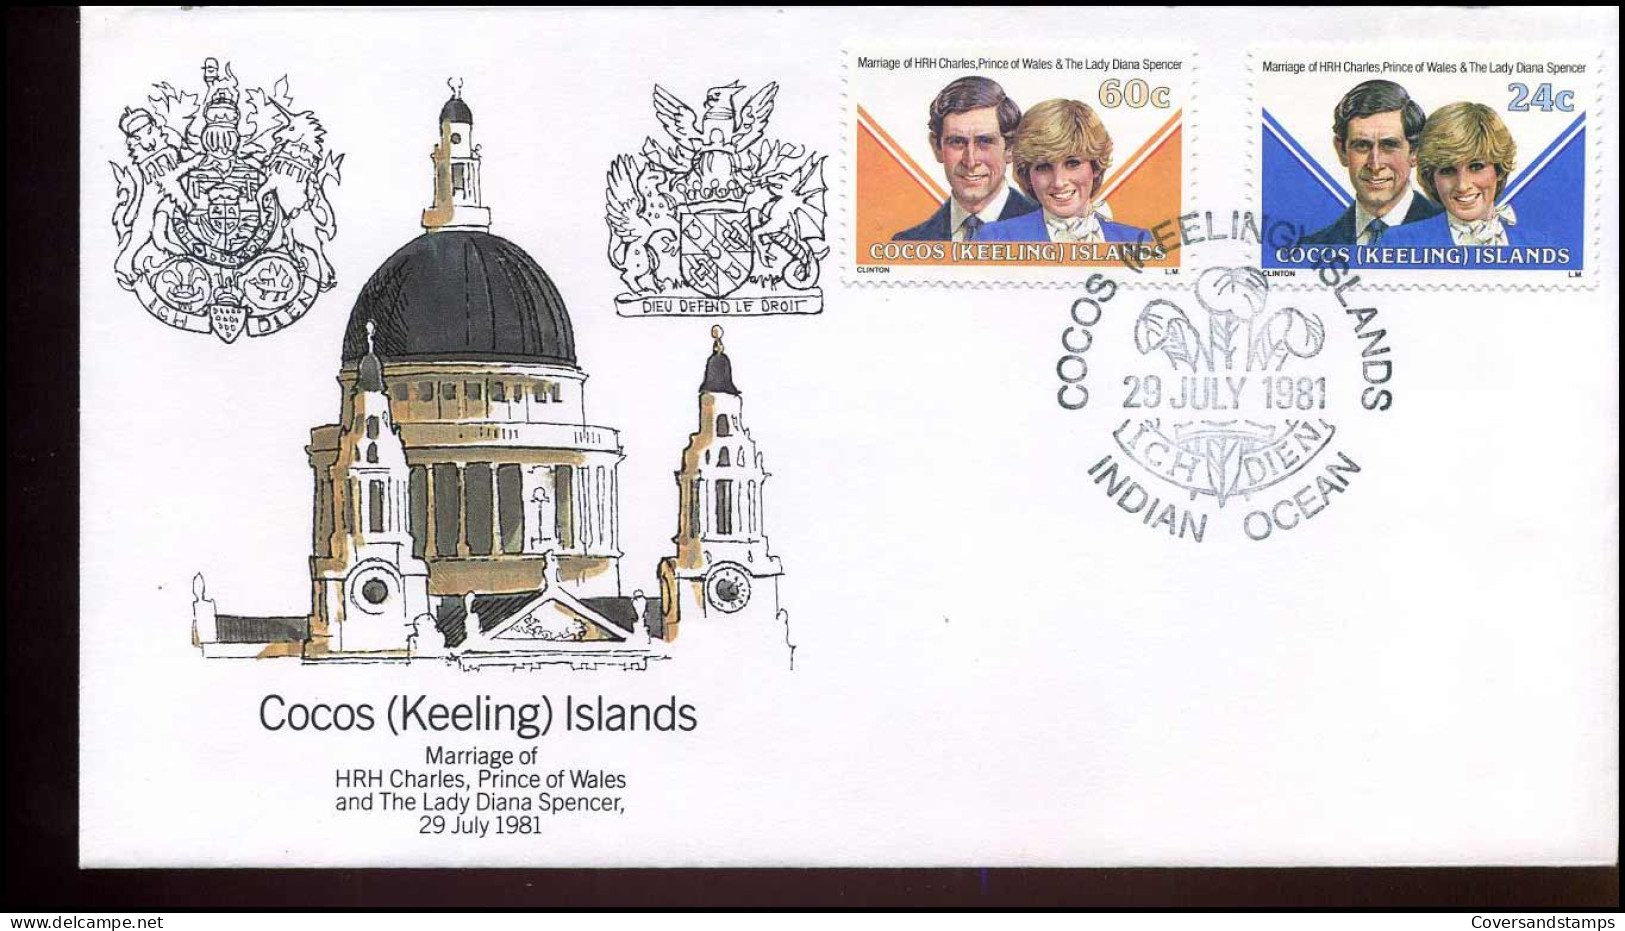 FDC - Marriage Of HRH Charles, Prince Of Wales And The Lady Diana Spencer - Islas Cocos (Keeling)